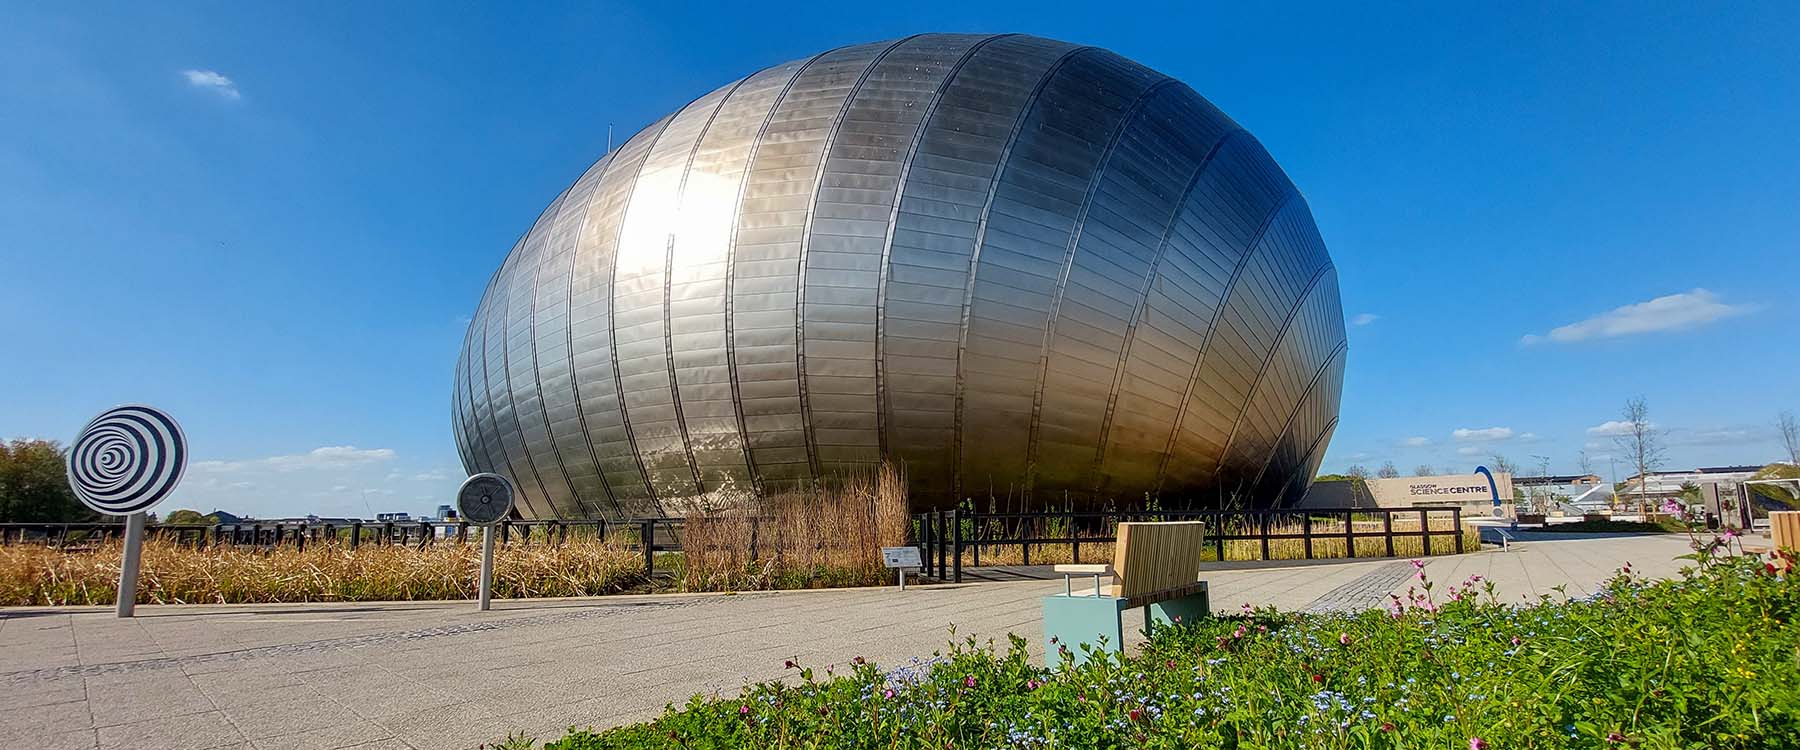 An external view of the IMAX at Glasgow Science Centre on a sunny day. The silver metallic dome is surrounded by a moat and wildflowers. 